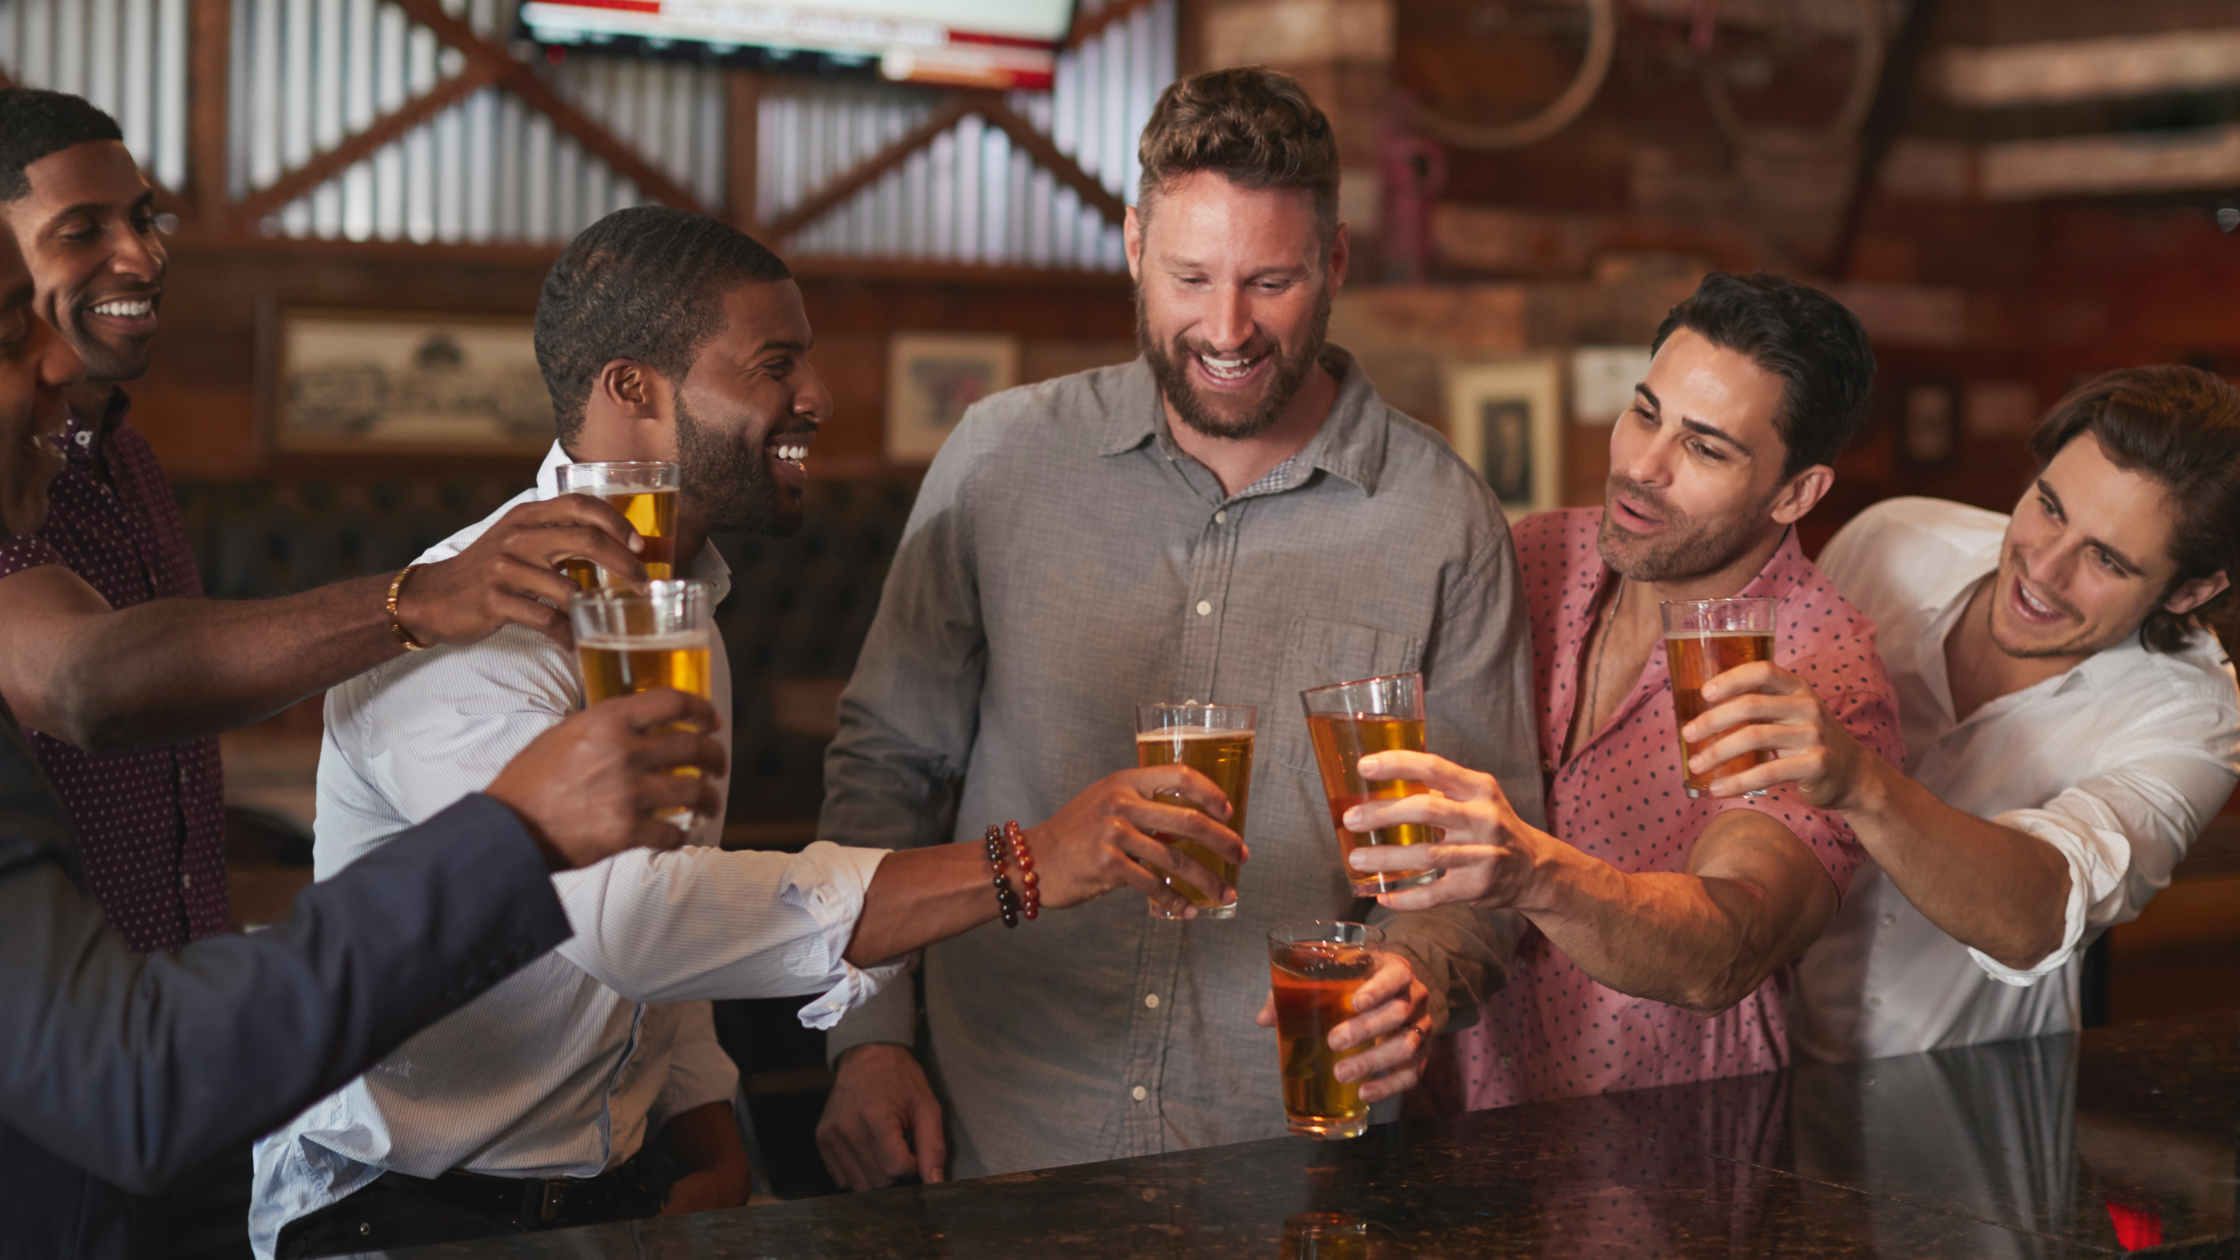 The 21 Best Bachelor Party Cities & Destinations